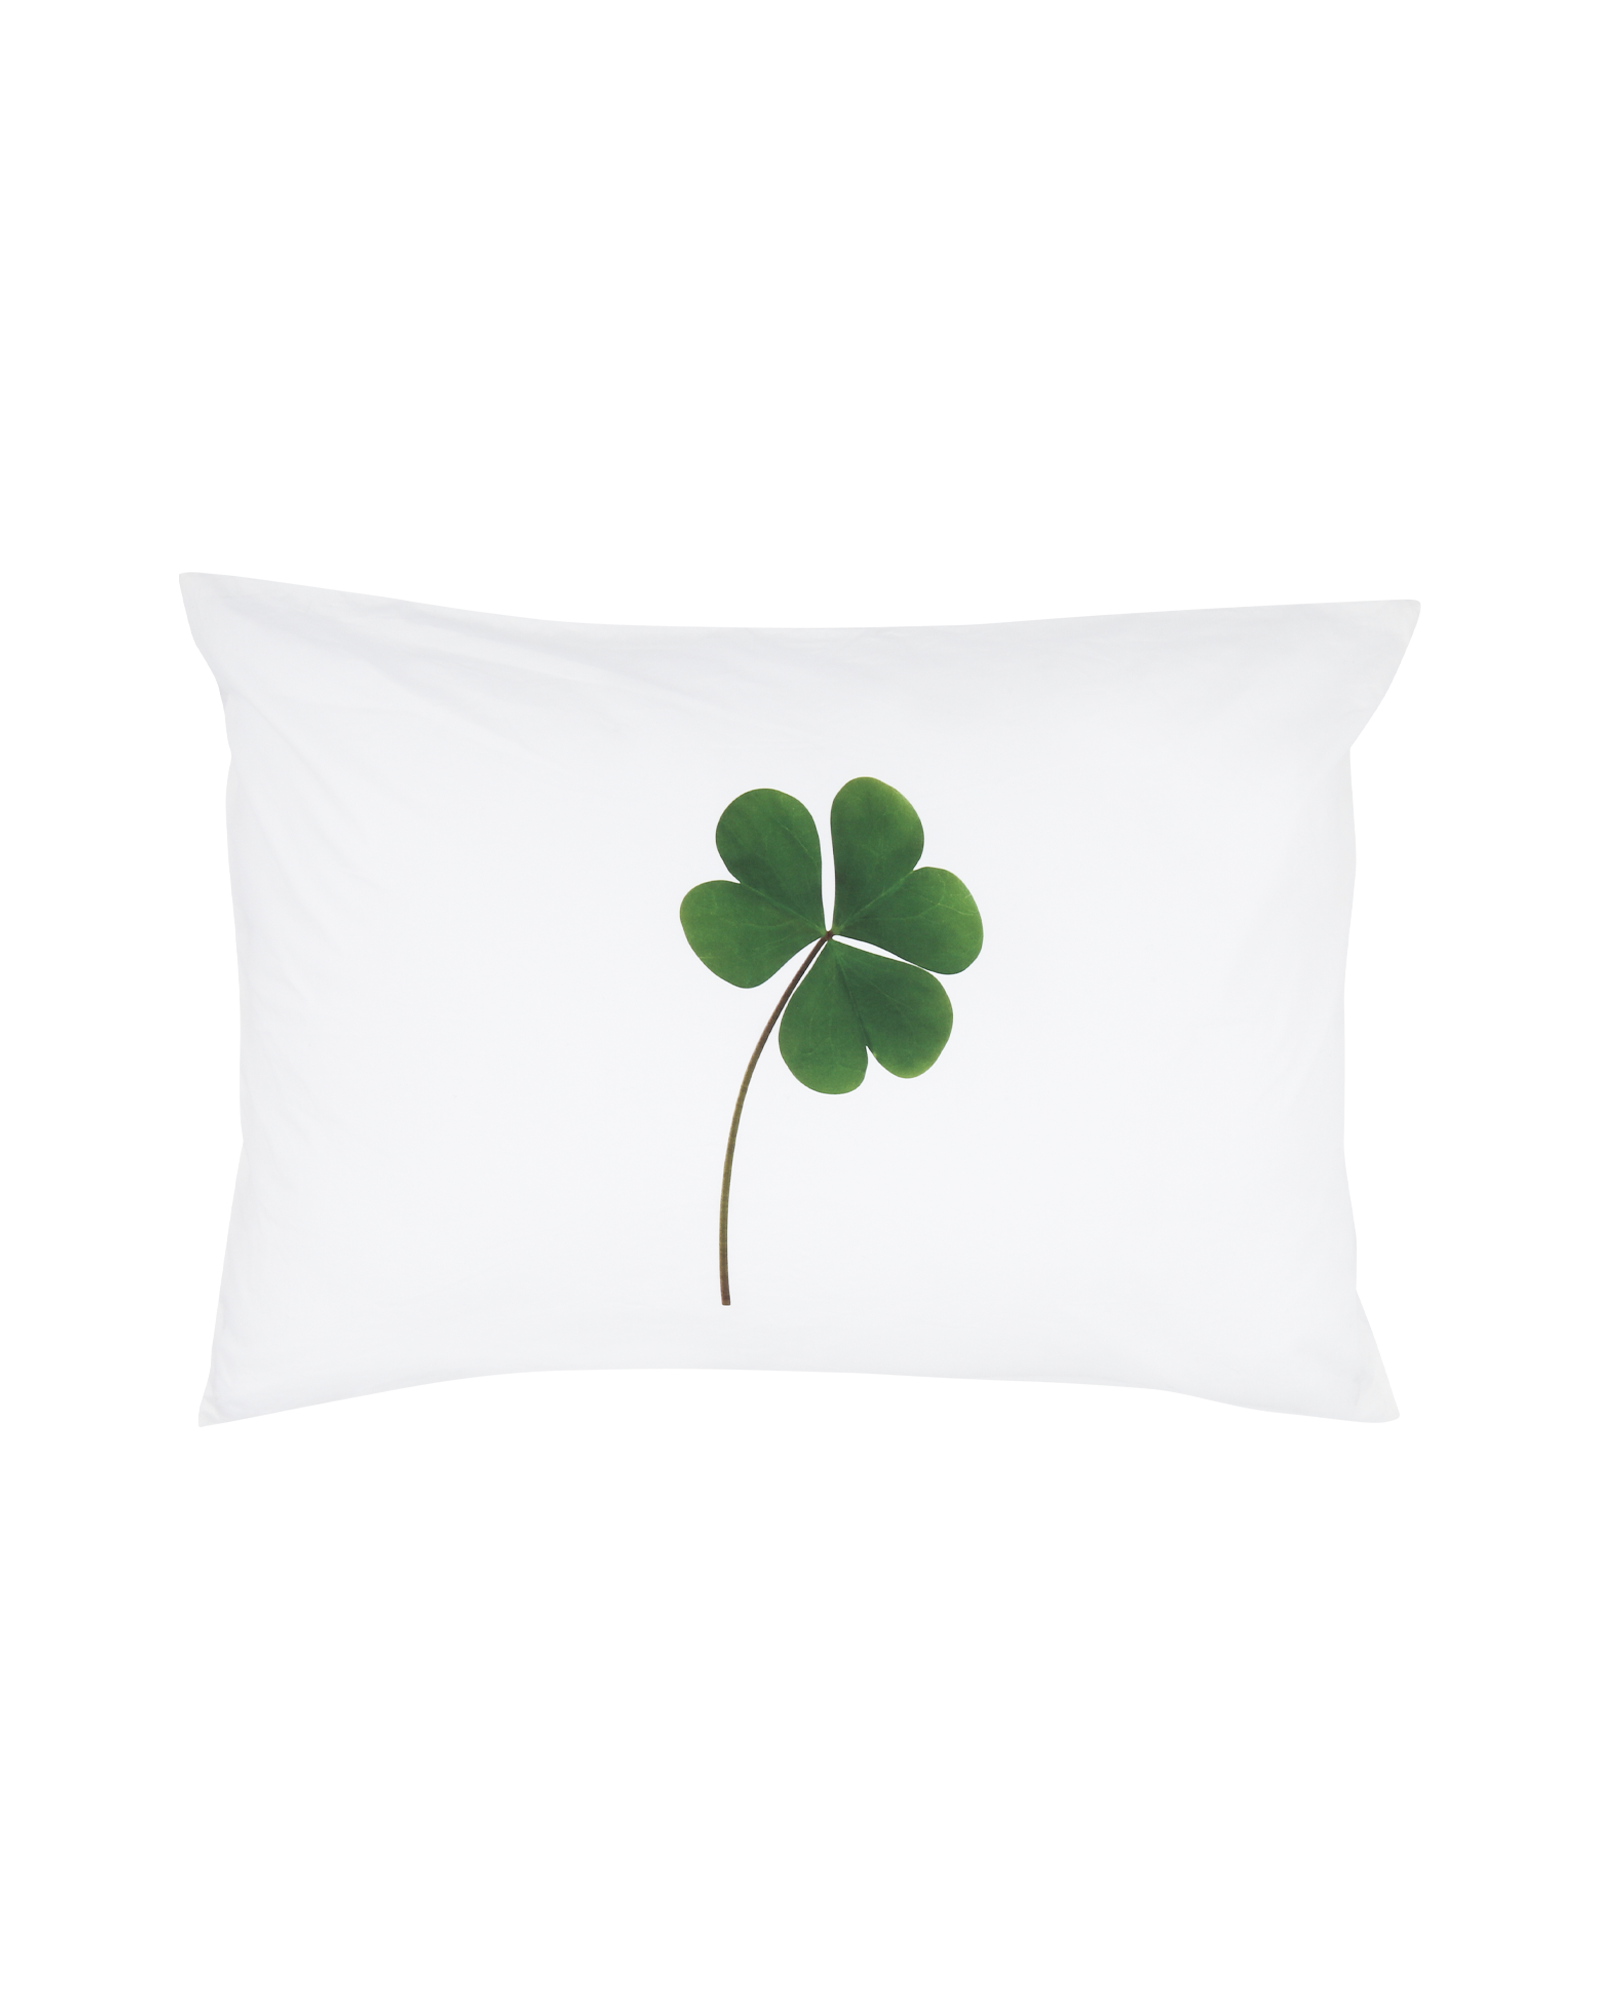 THE LUCKY CHARM PILLOW COVER